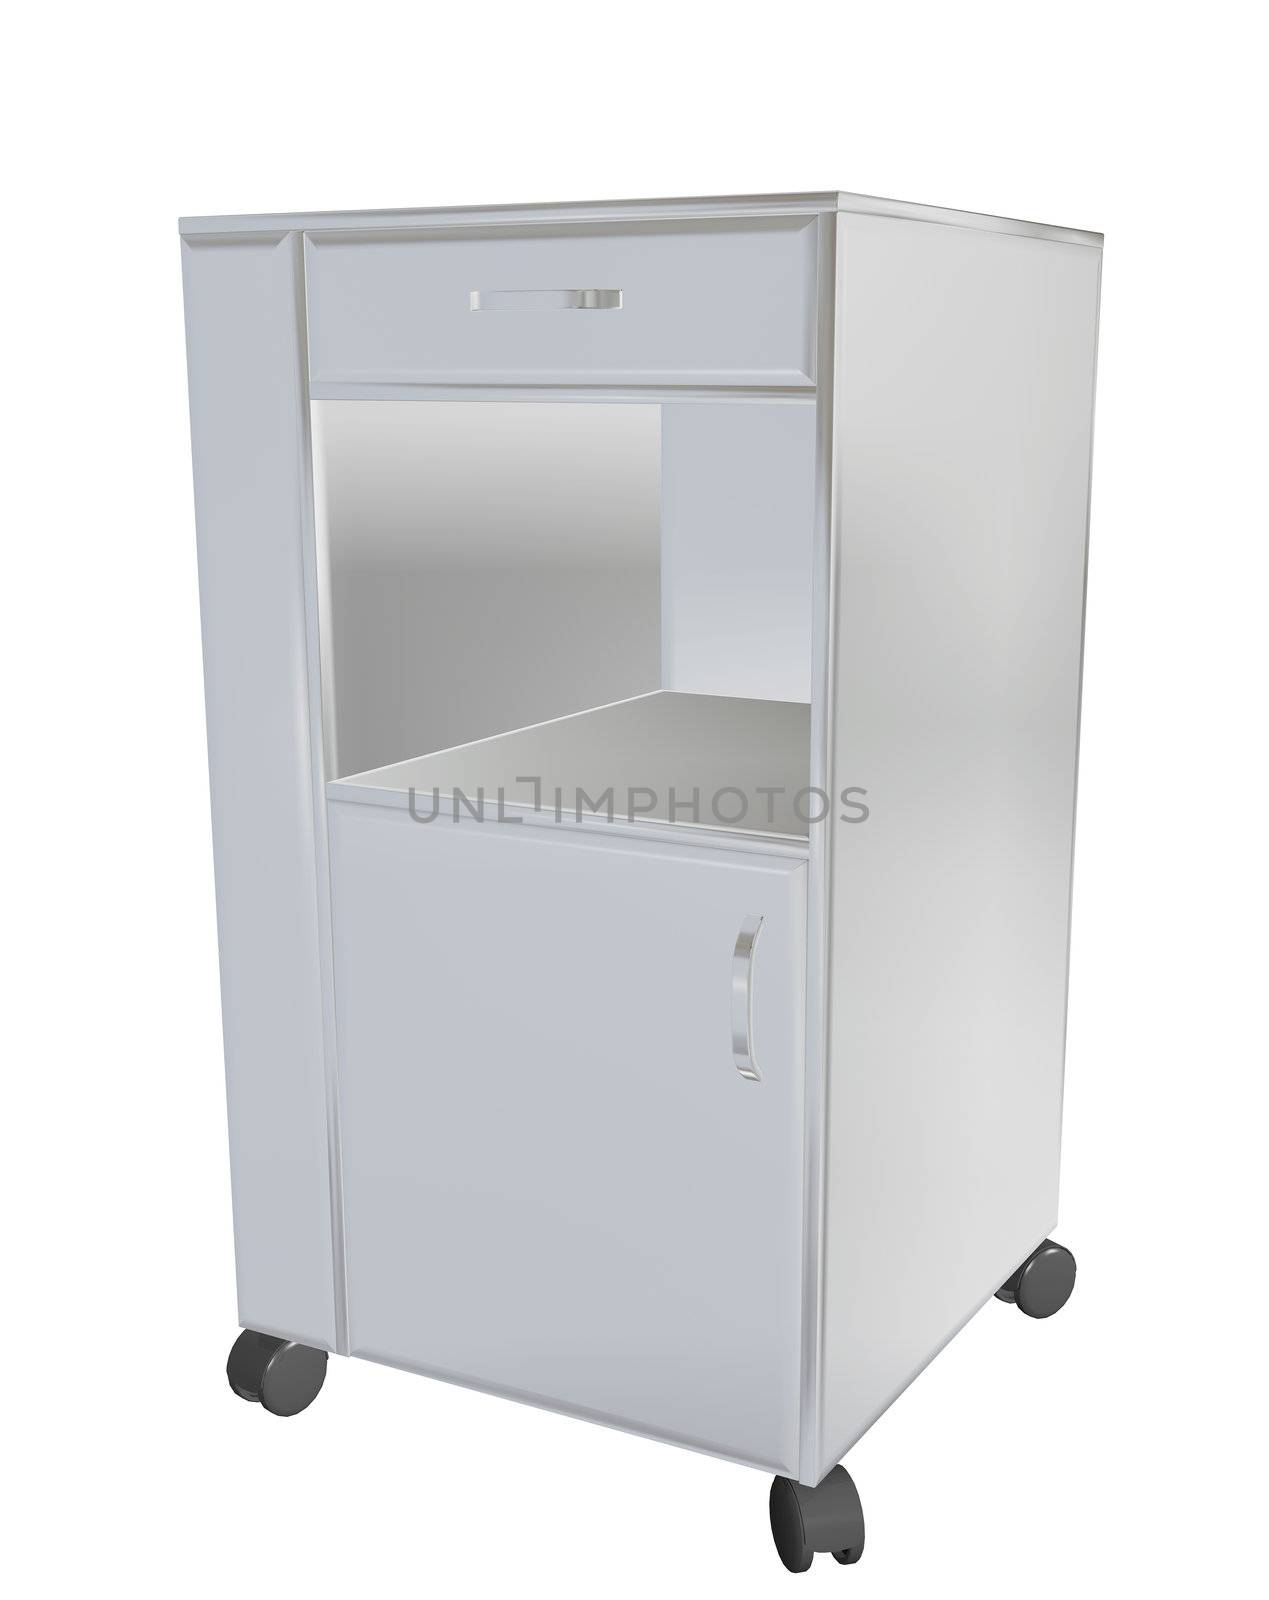 Stainless steel mobile cupboard, 3d illustration, for medical use, isolated against a white background